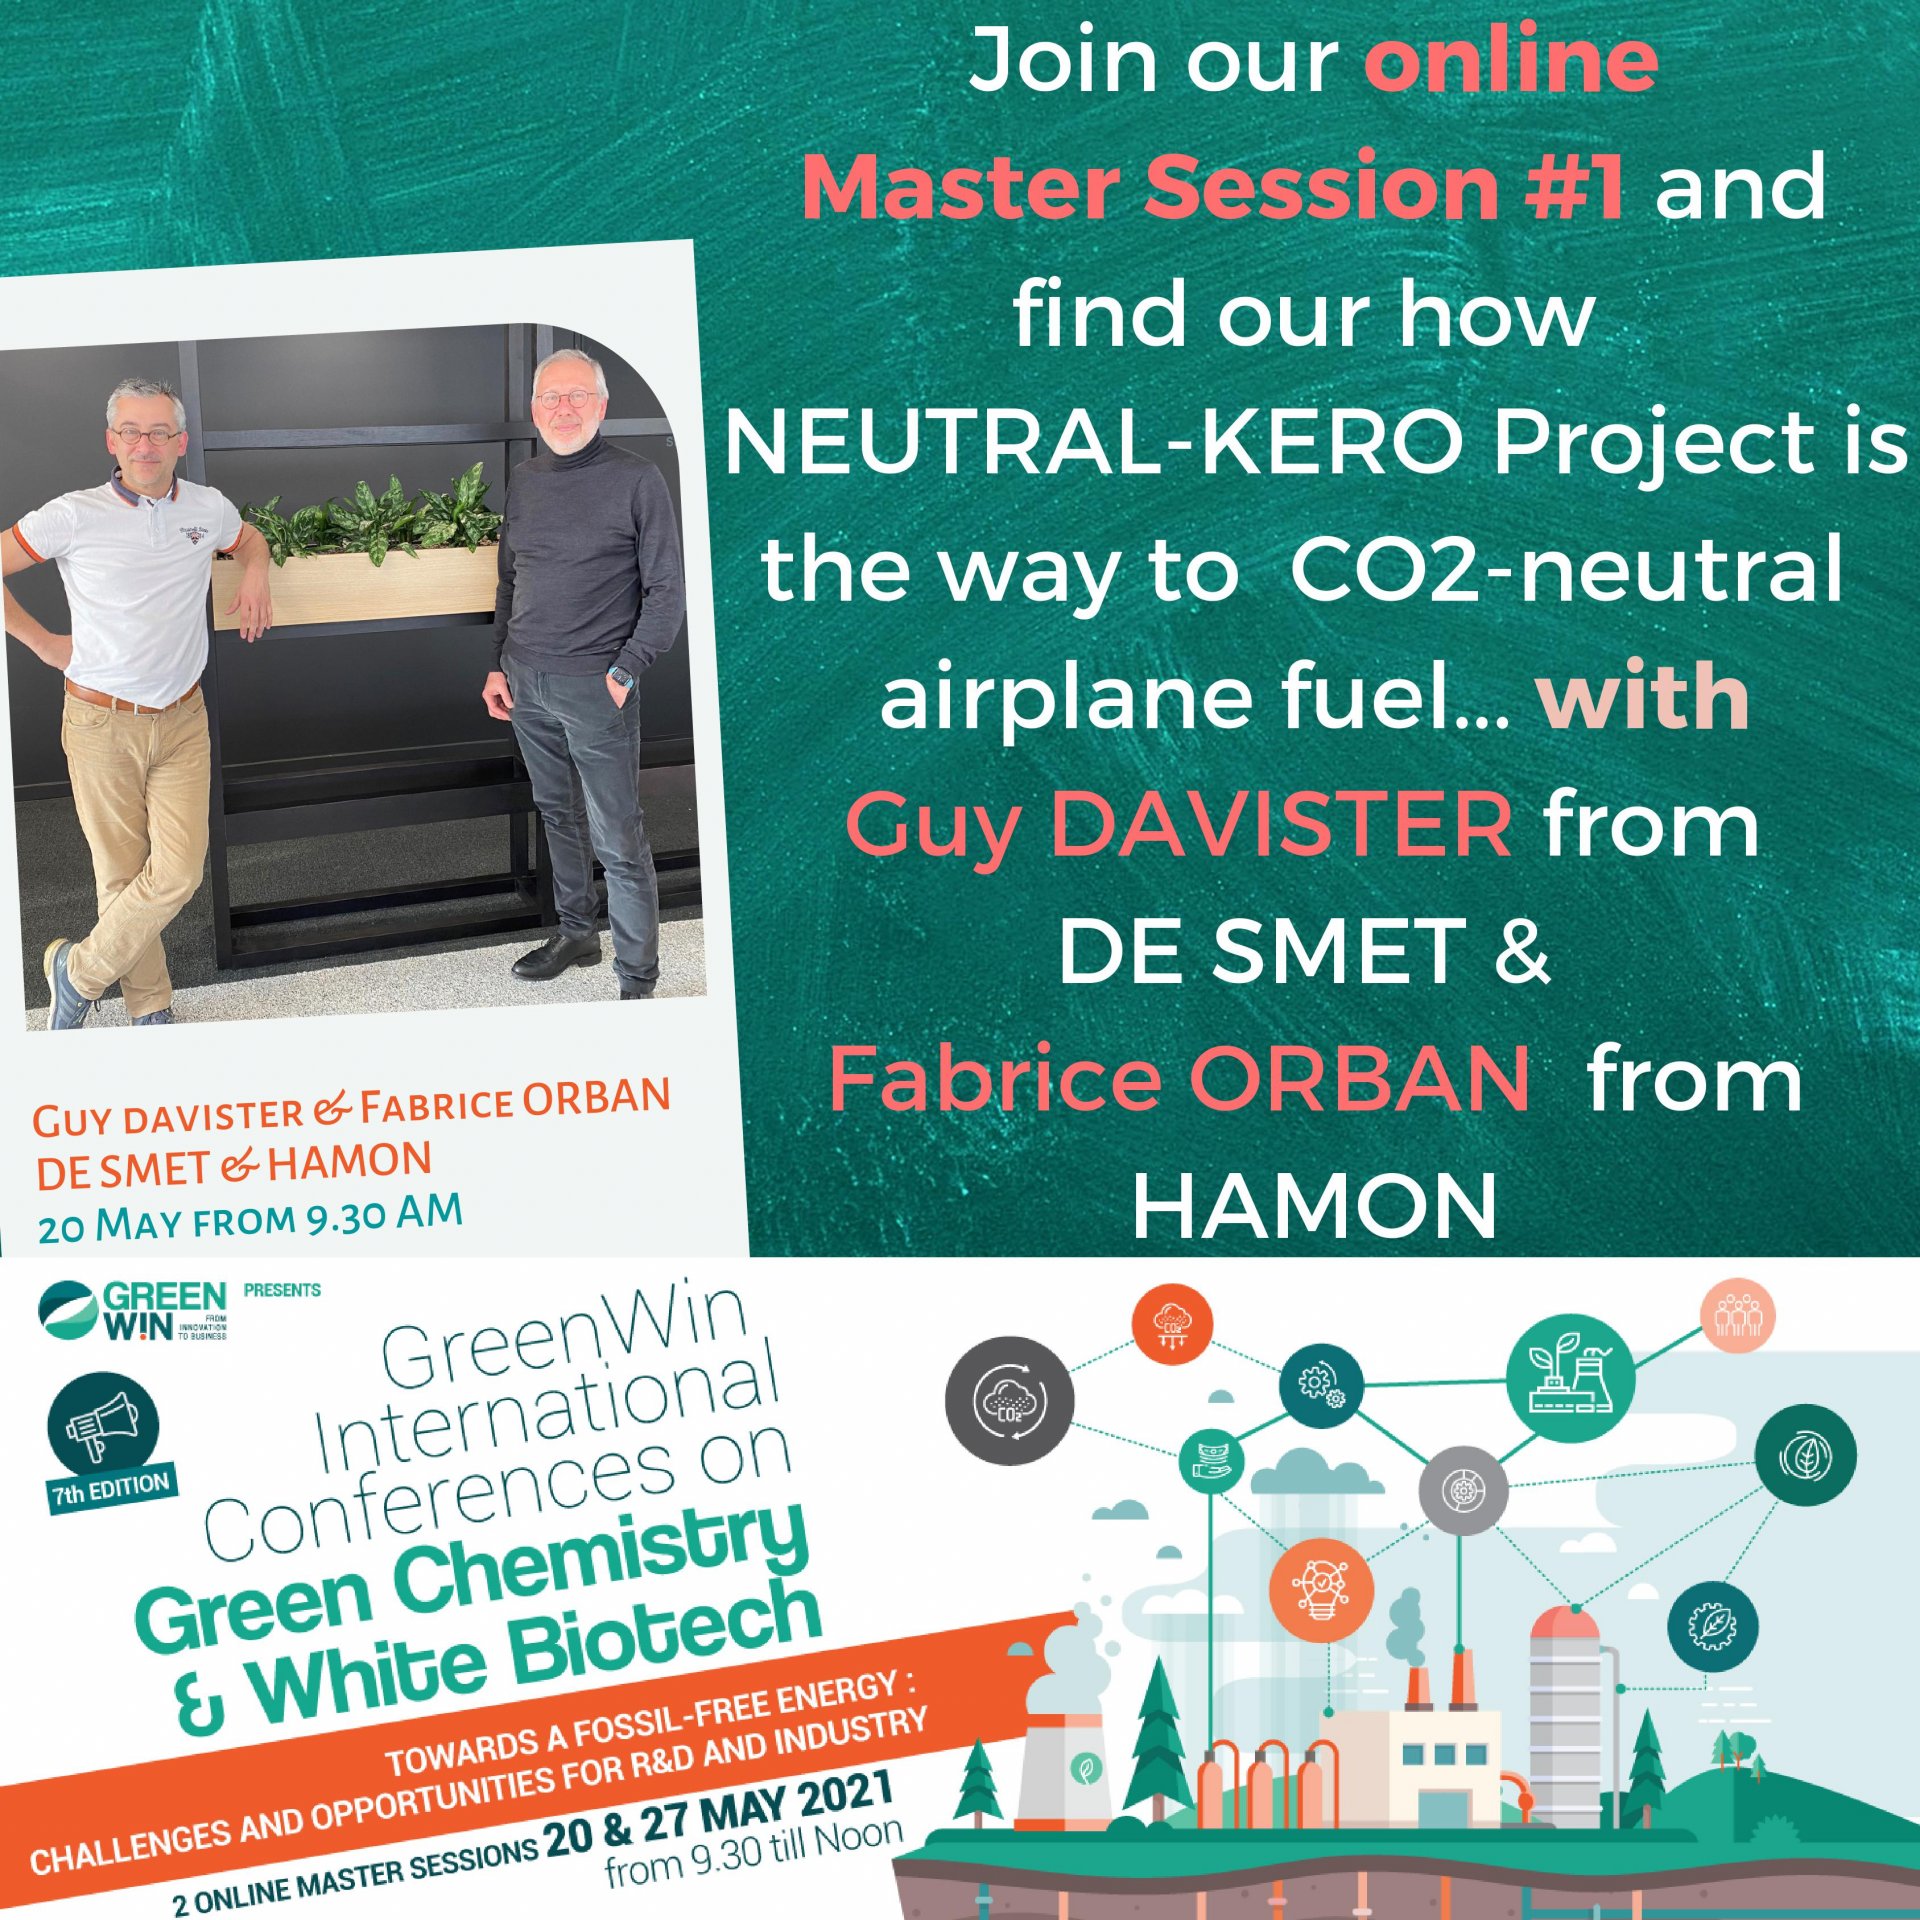 Want to find out how to produce CO2-neutral airplane fuel? Meet Guy DAVISTER from DE SMET & Fabrice ORBAN from HAMON Group  Register NOW at our Master Sessions on Green Chemistry & White Biotech!